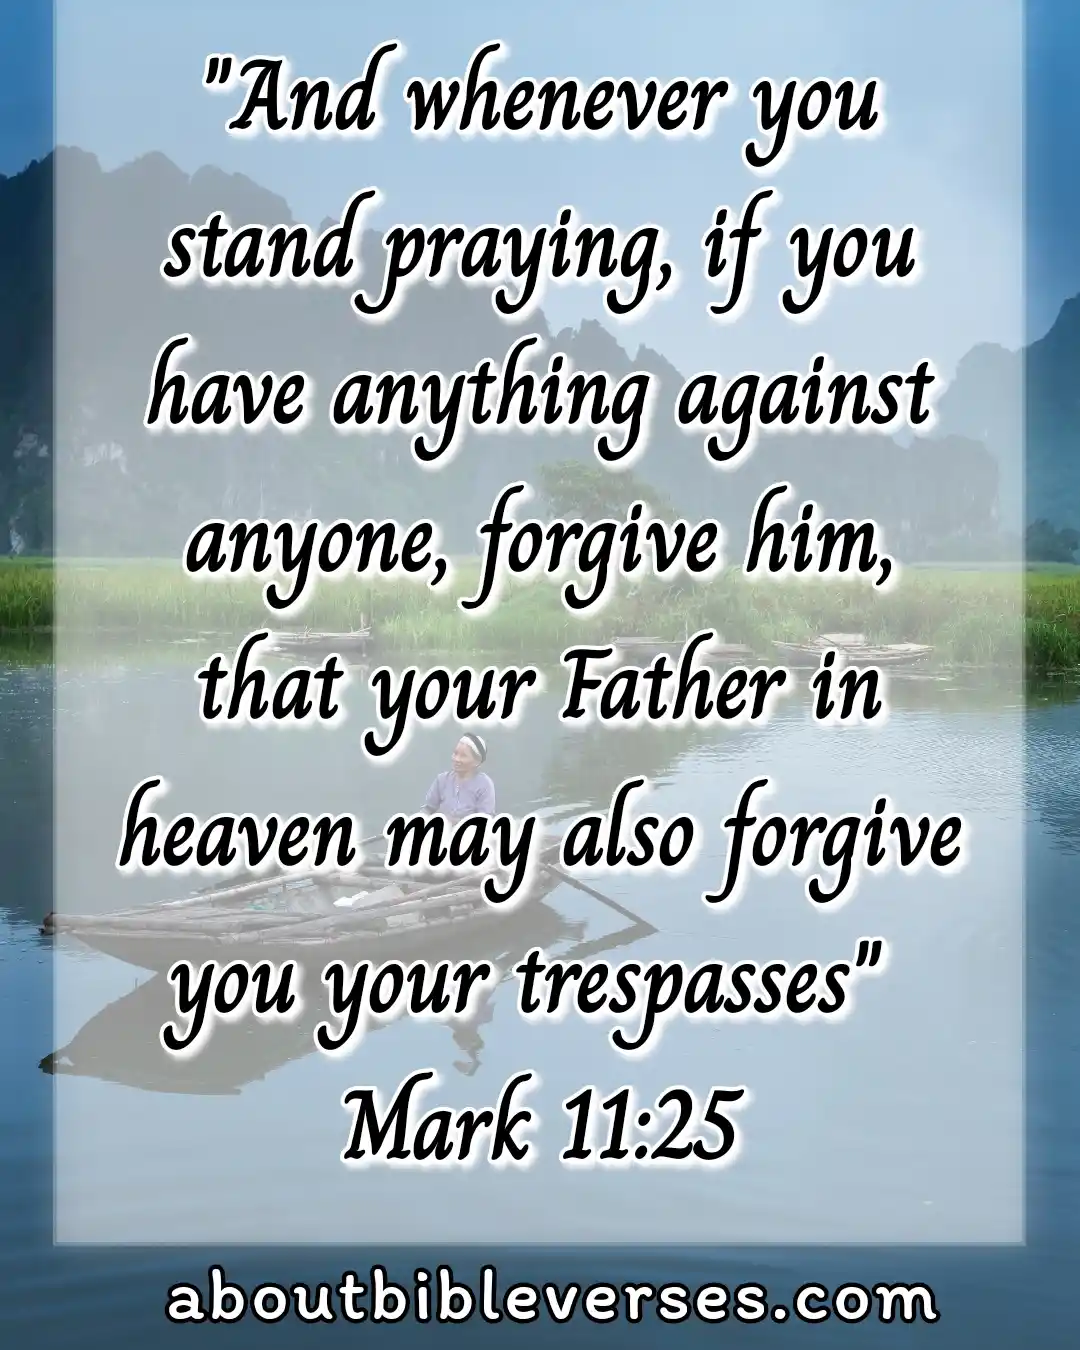 Bible Verses About Praying With Wrong Motive (Mark 11:25)